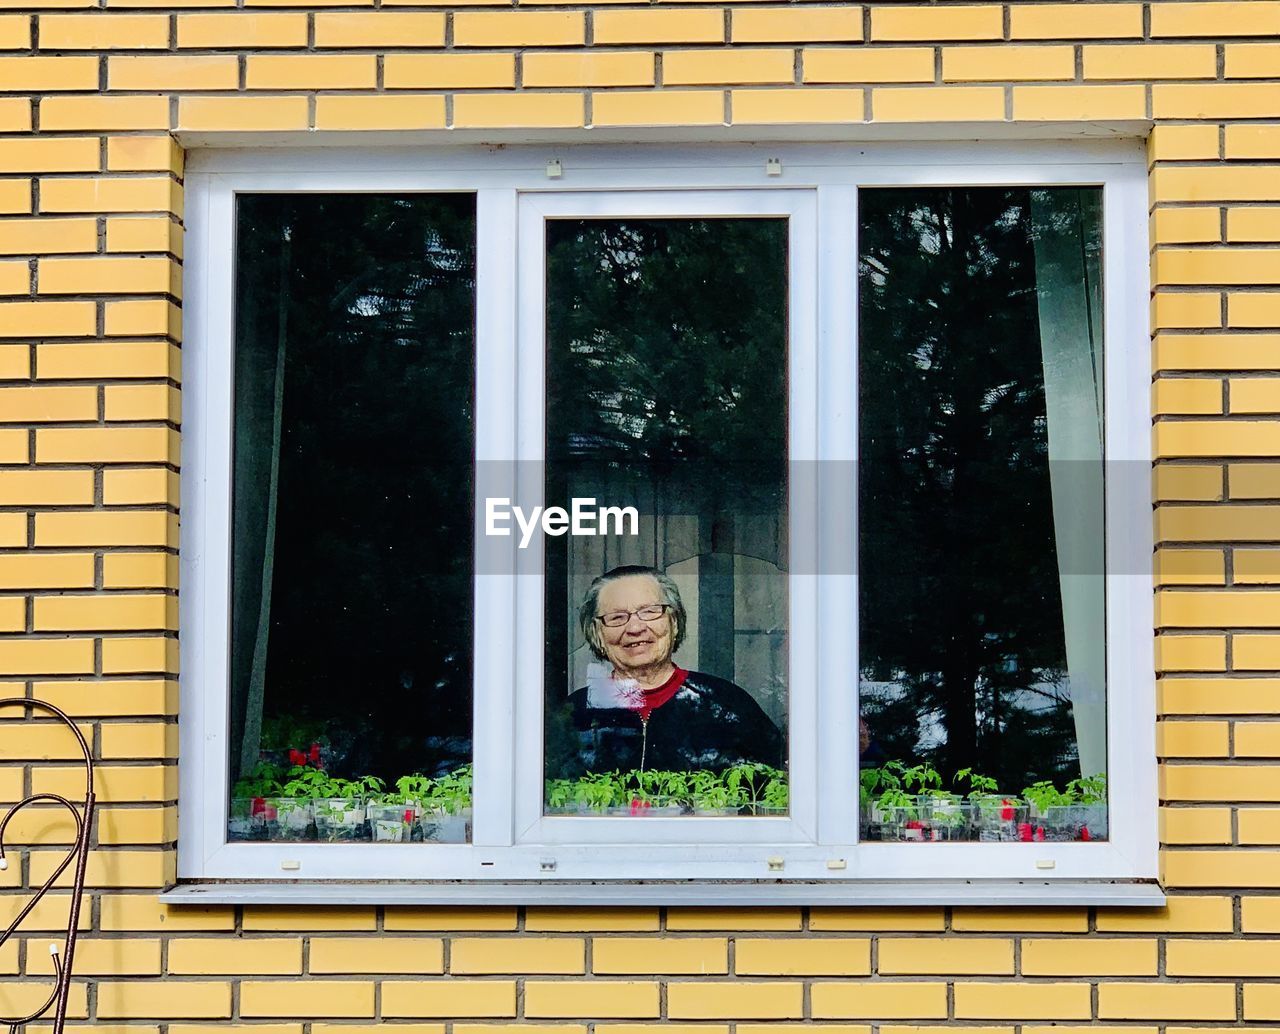 Portrait of woman seen through window of house